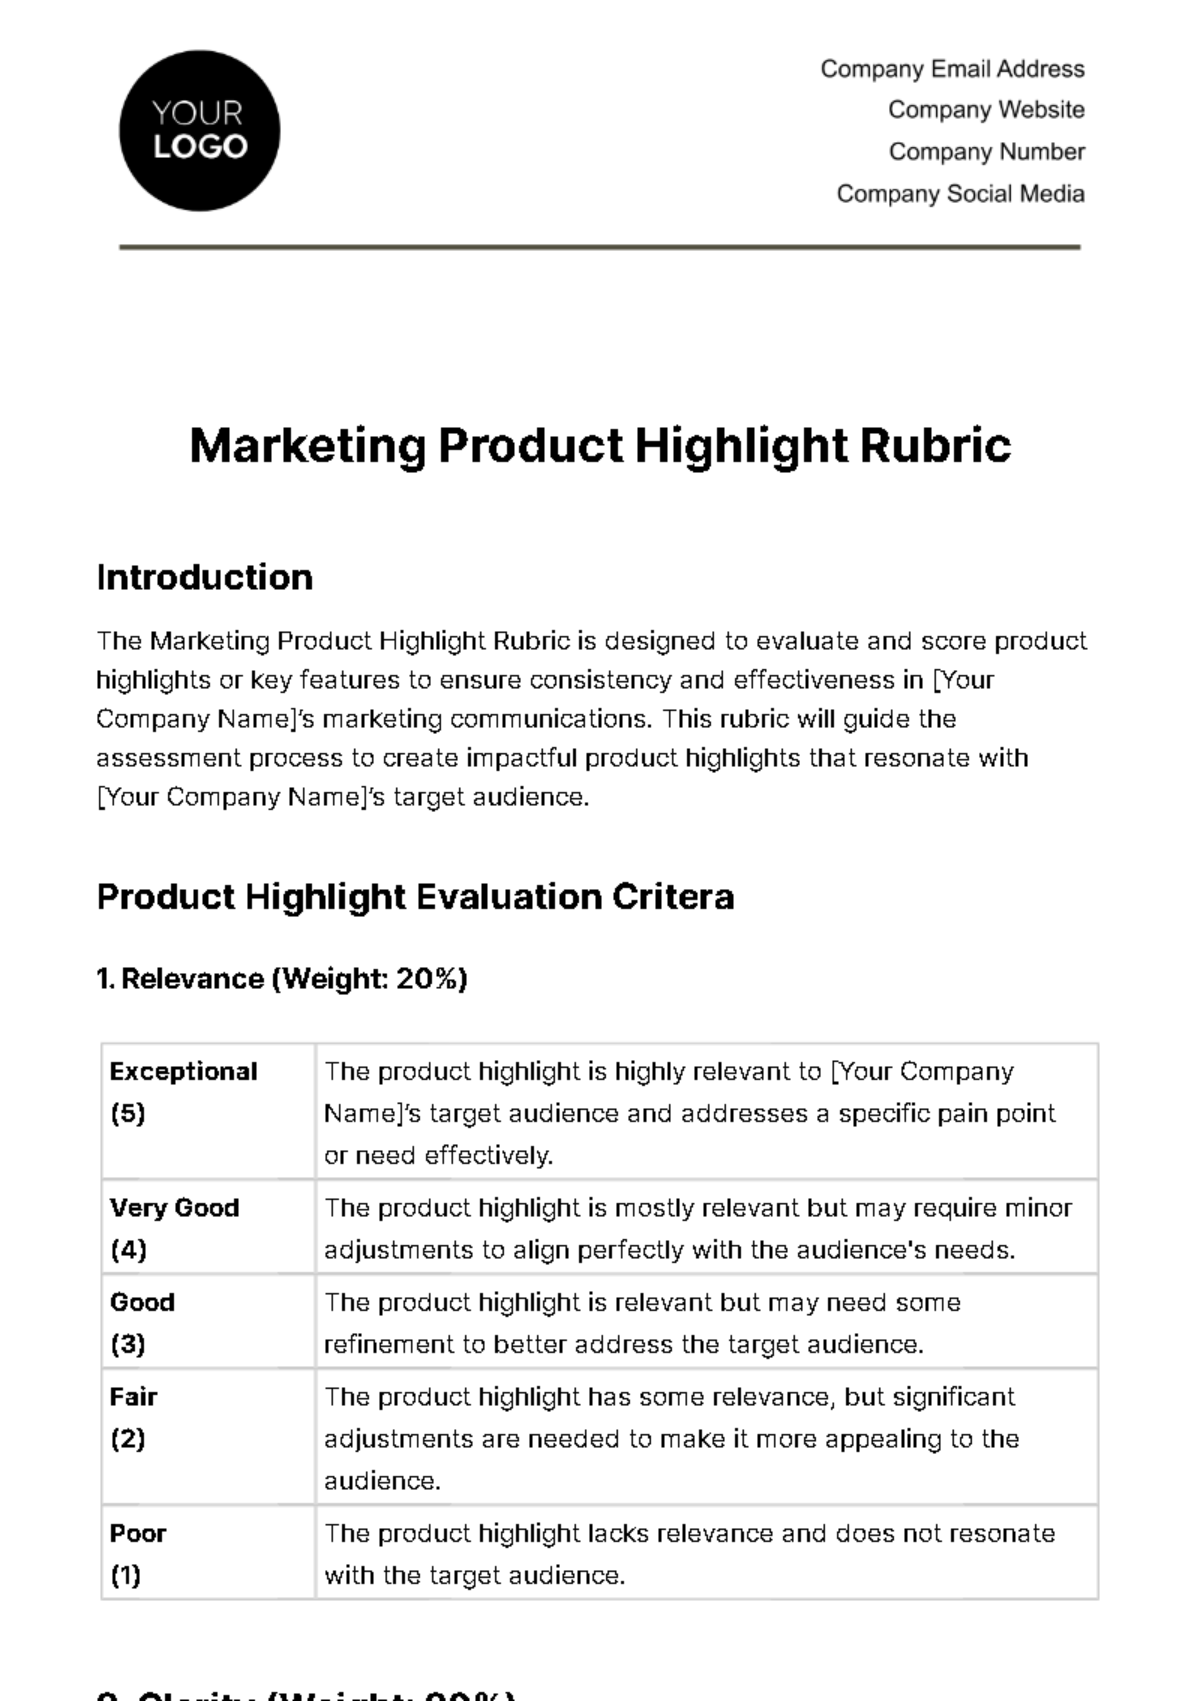 Marketing Product Highlight Rubric Template